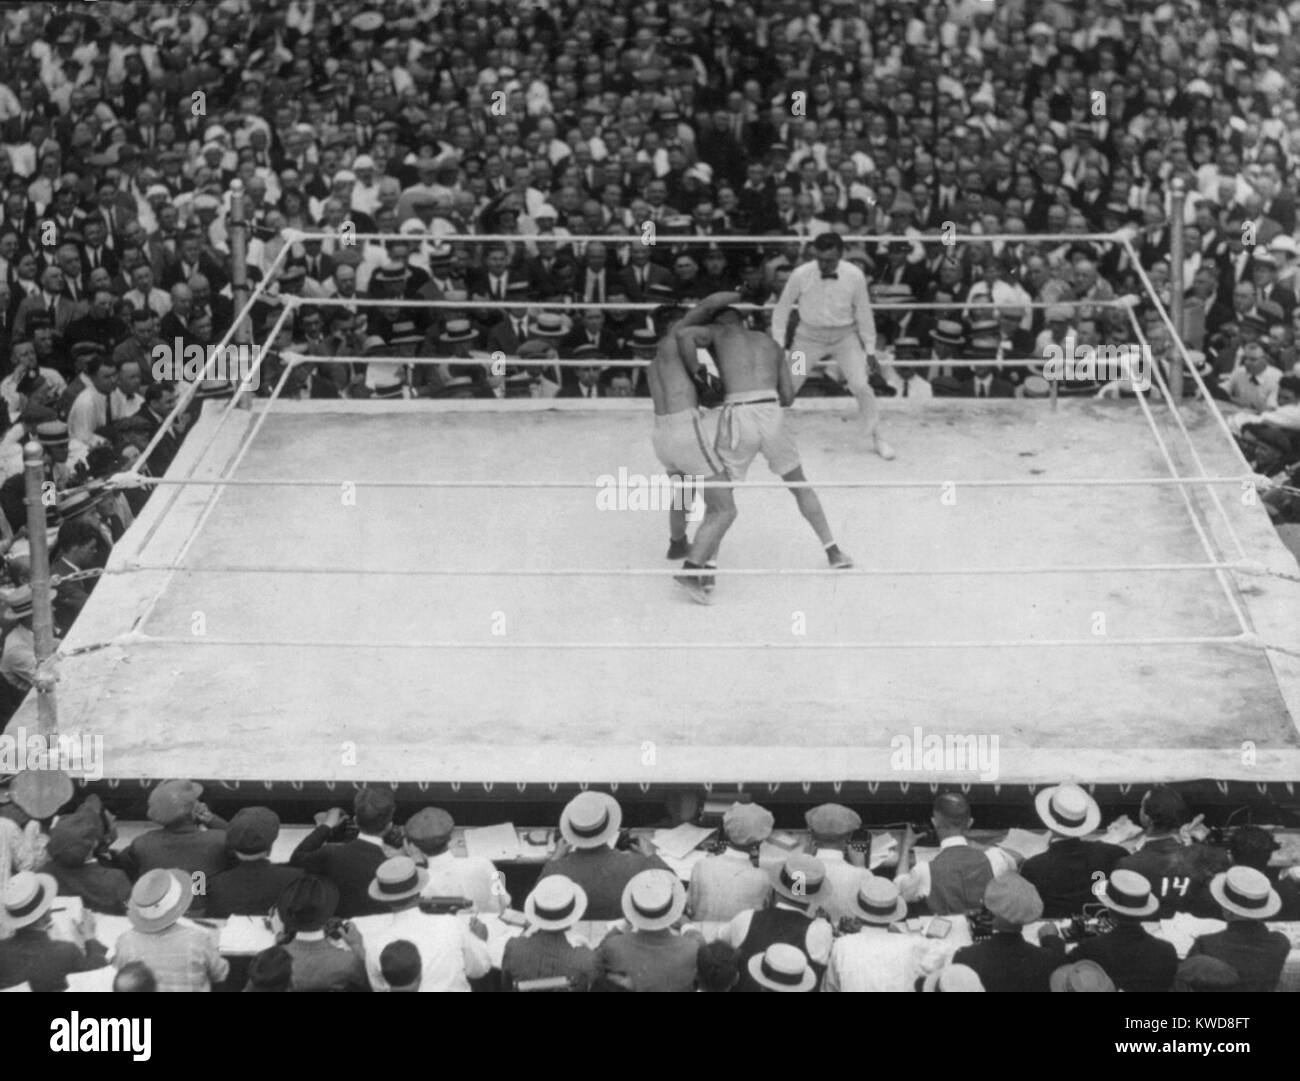 Jack Dempsey and Georges Carpentier boxing for the World Heavyweight title, July 2, 1921. Over 80,000 fans brought in boxing's first million dollar gate. Dempsey knocked Carpentier out in the fourth round. (BSLOC 2015 17 65) Stock Photo